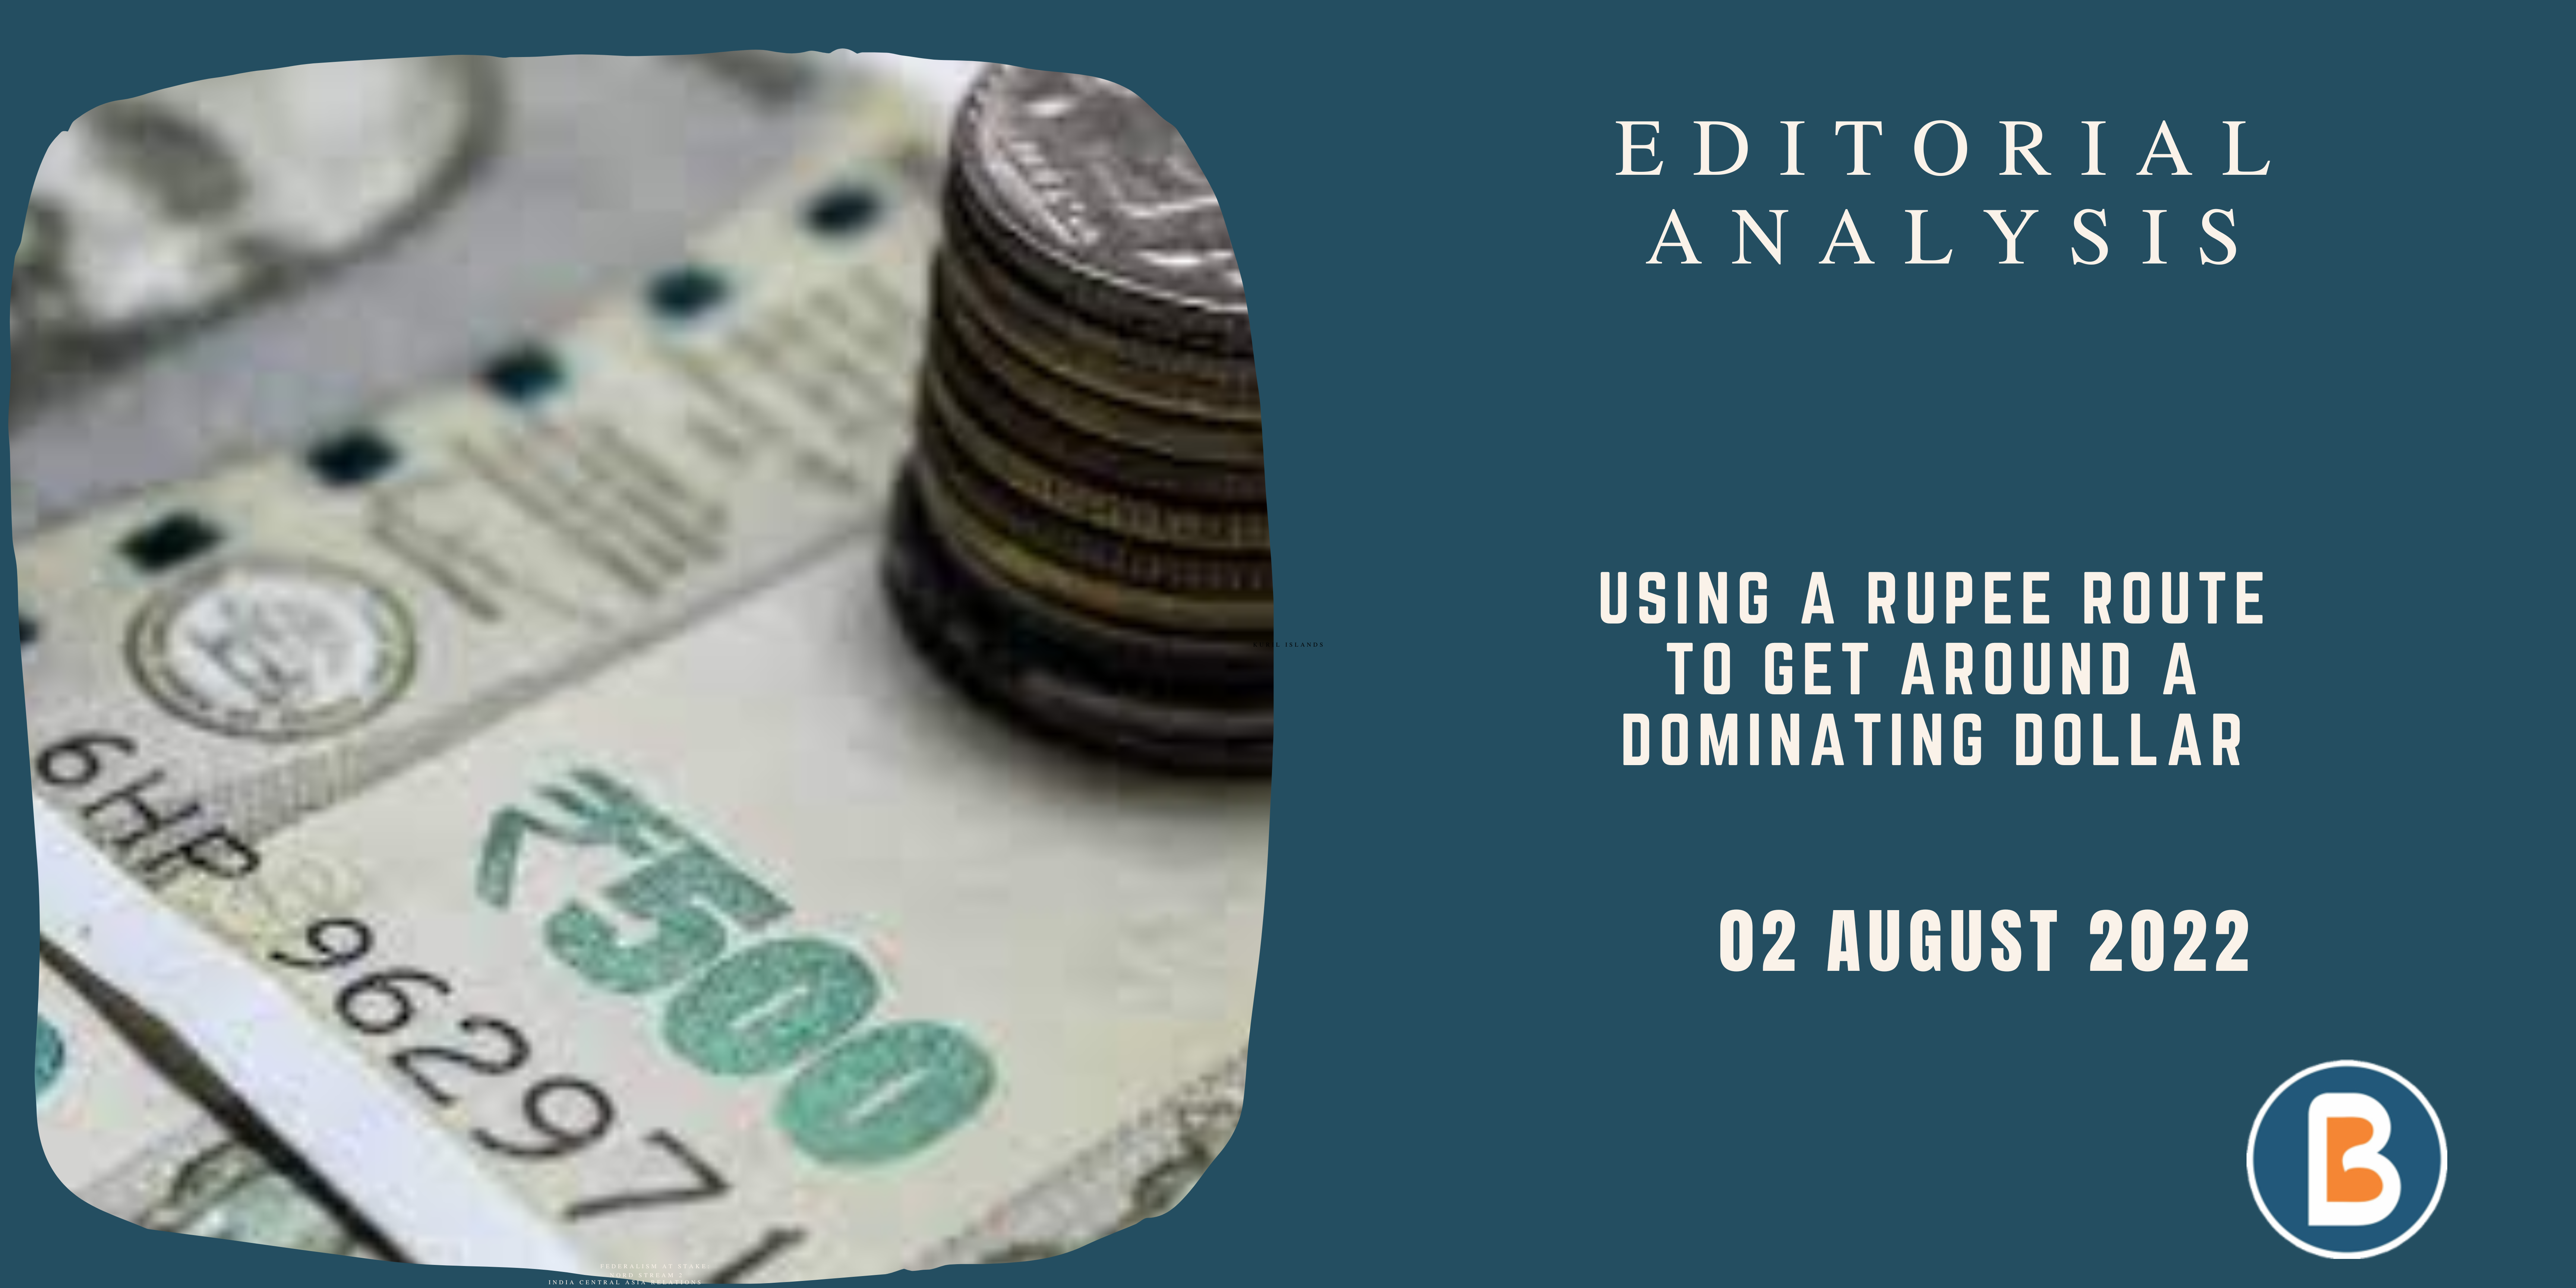 EDITORIAL ANALYSIS For IAS - Using a Rupee Route to Get around a Dominating Dollar